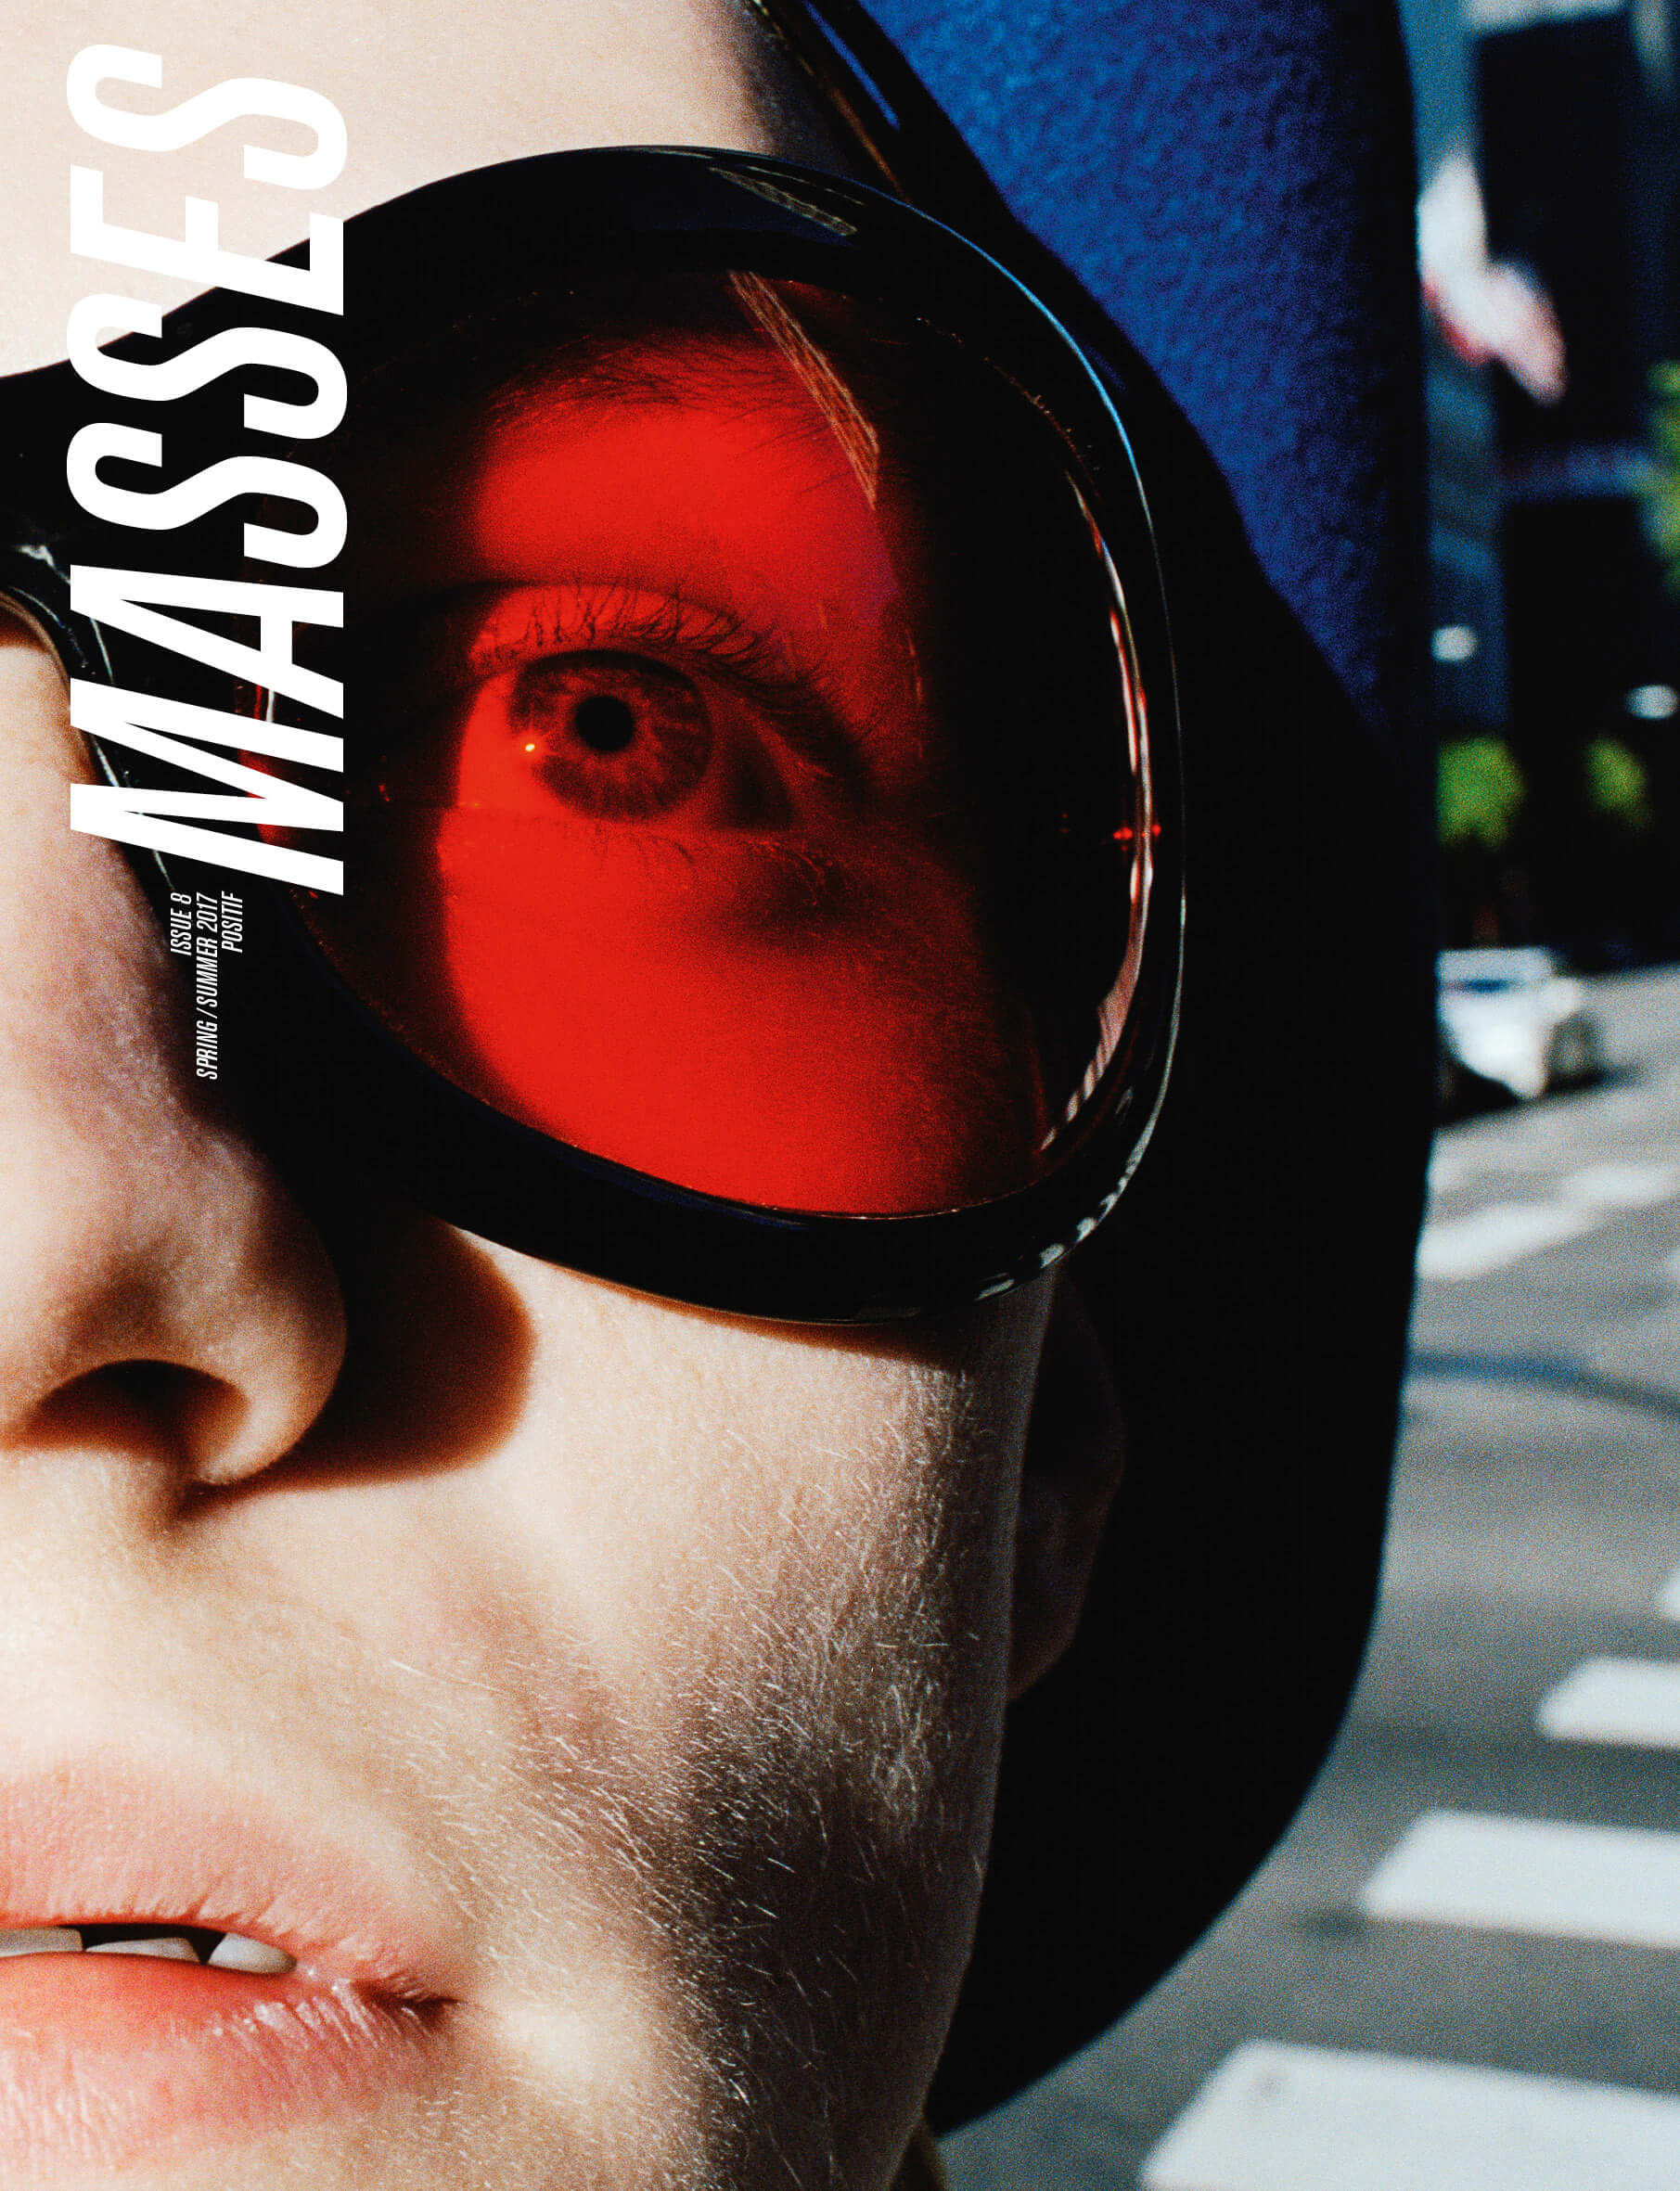 MASSES Magazine Issue No. 8 – Cover photographed by CG Watkins and Jay Massacret with Turner Barbur